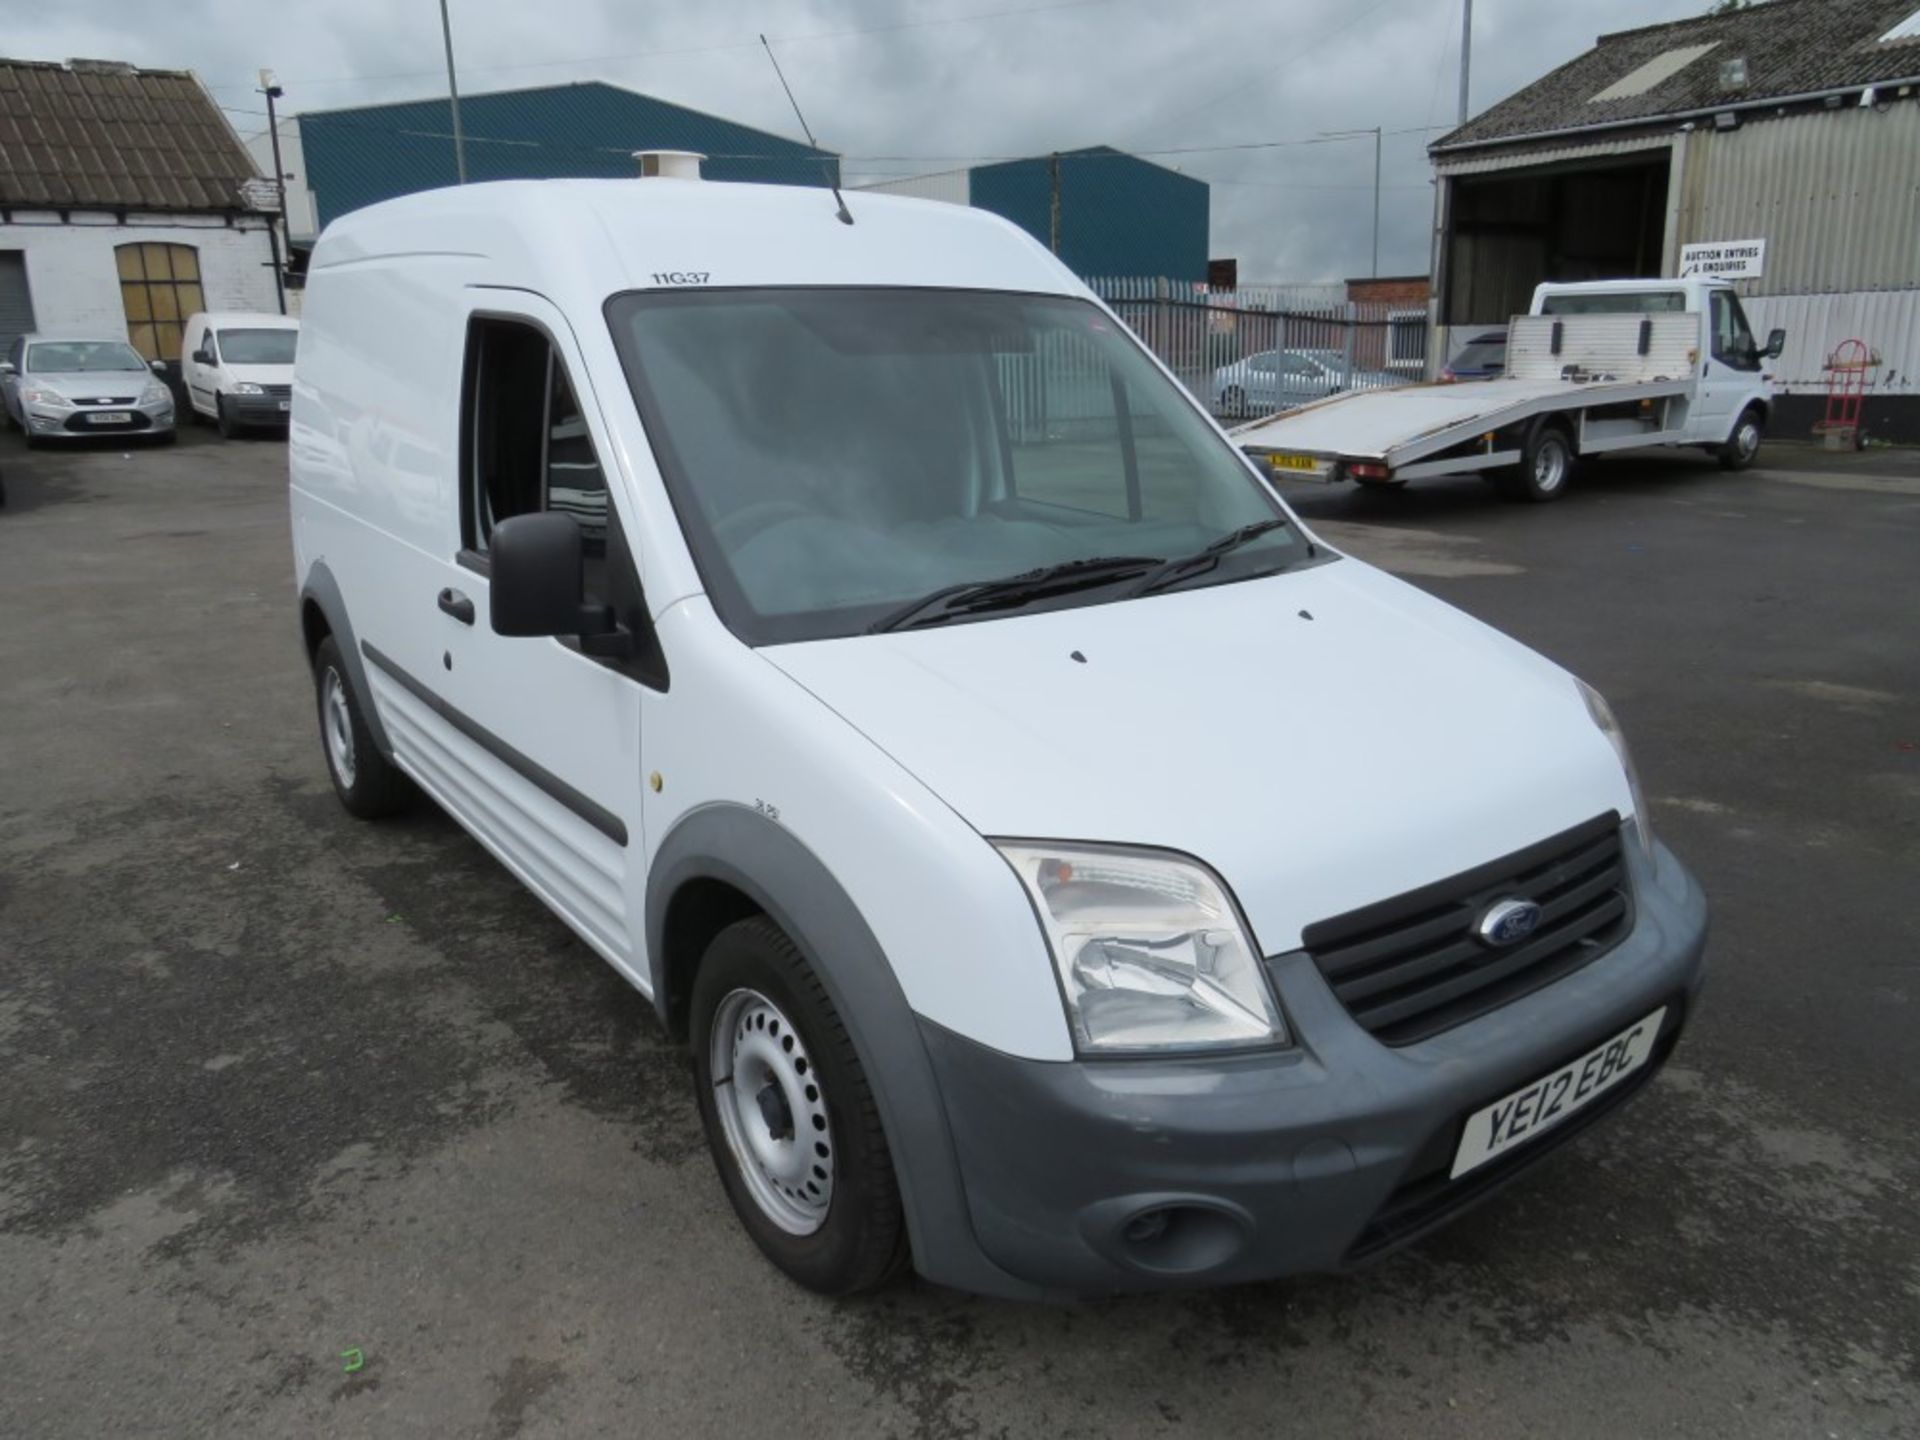 12 reg FORD TRANSIT CONNECT 90 T230, 1ST REG 05/12, TEST 12/20, 109077M, V5 HERE, 1 OWNER FROM